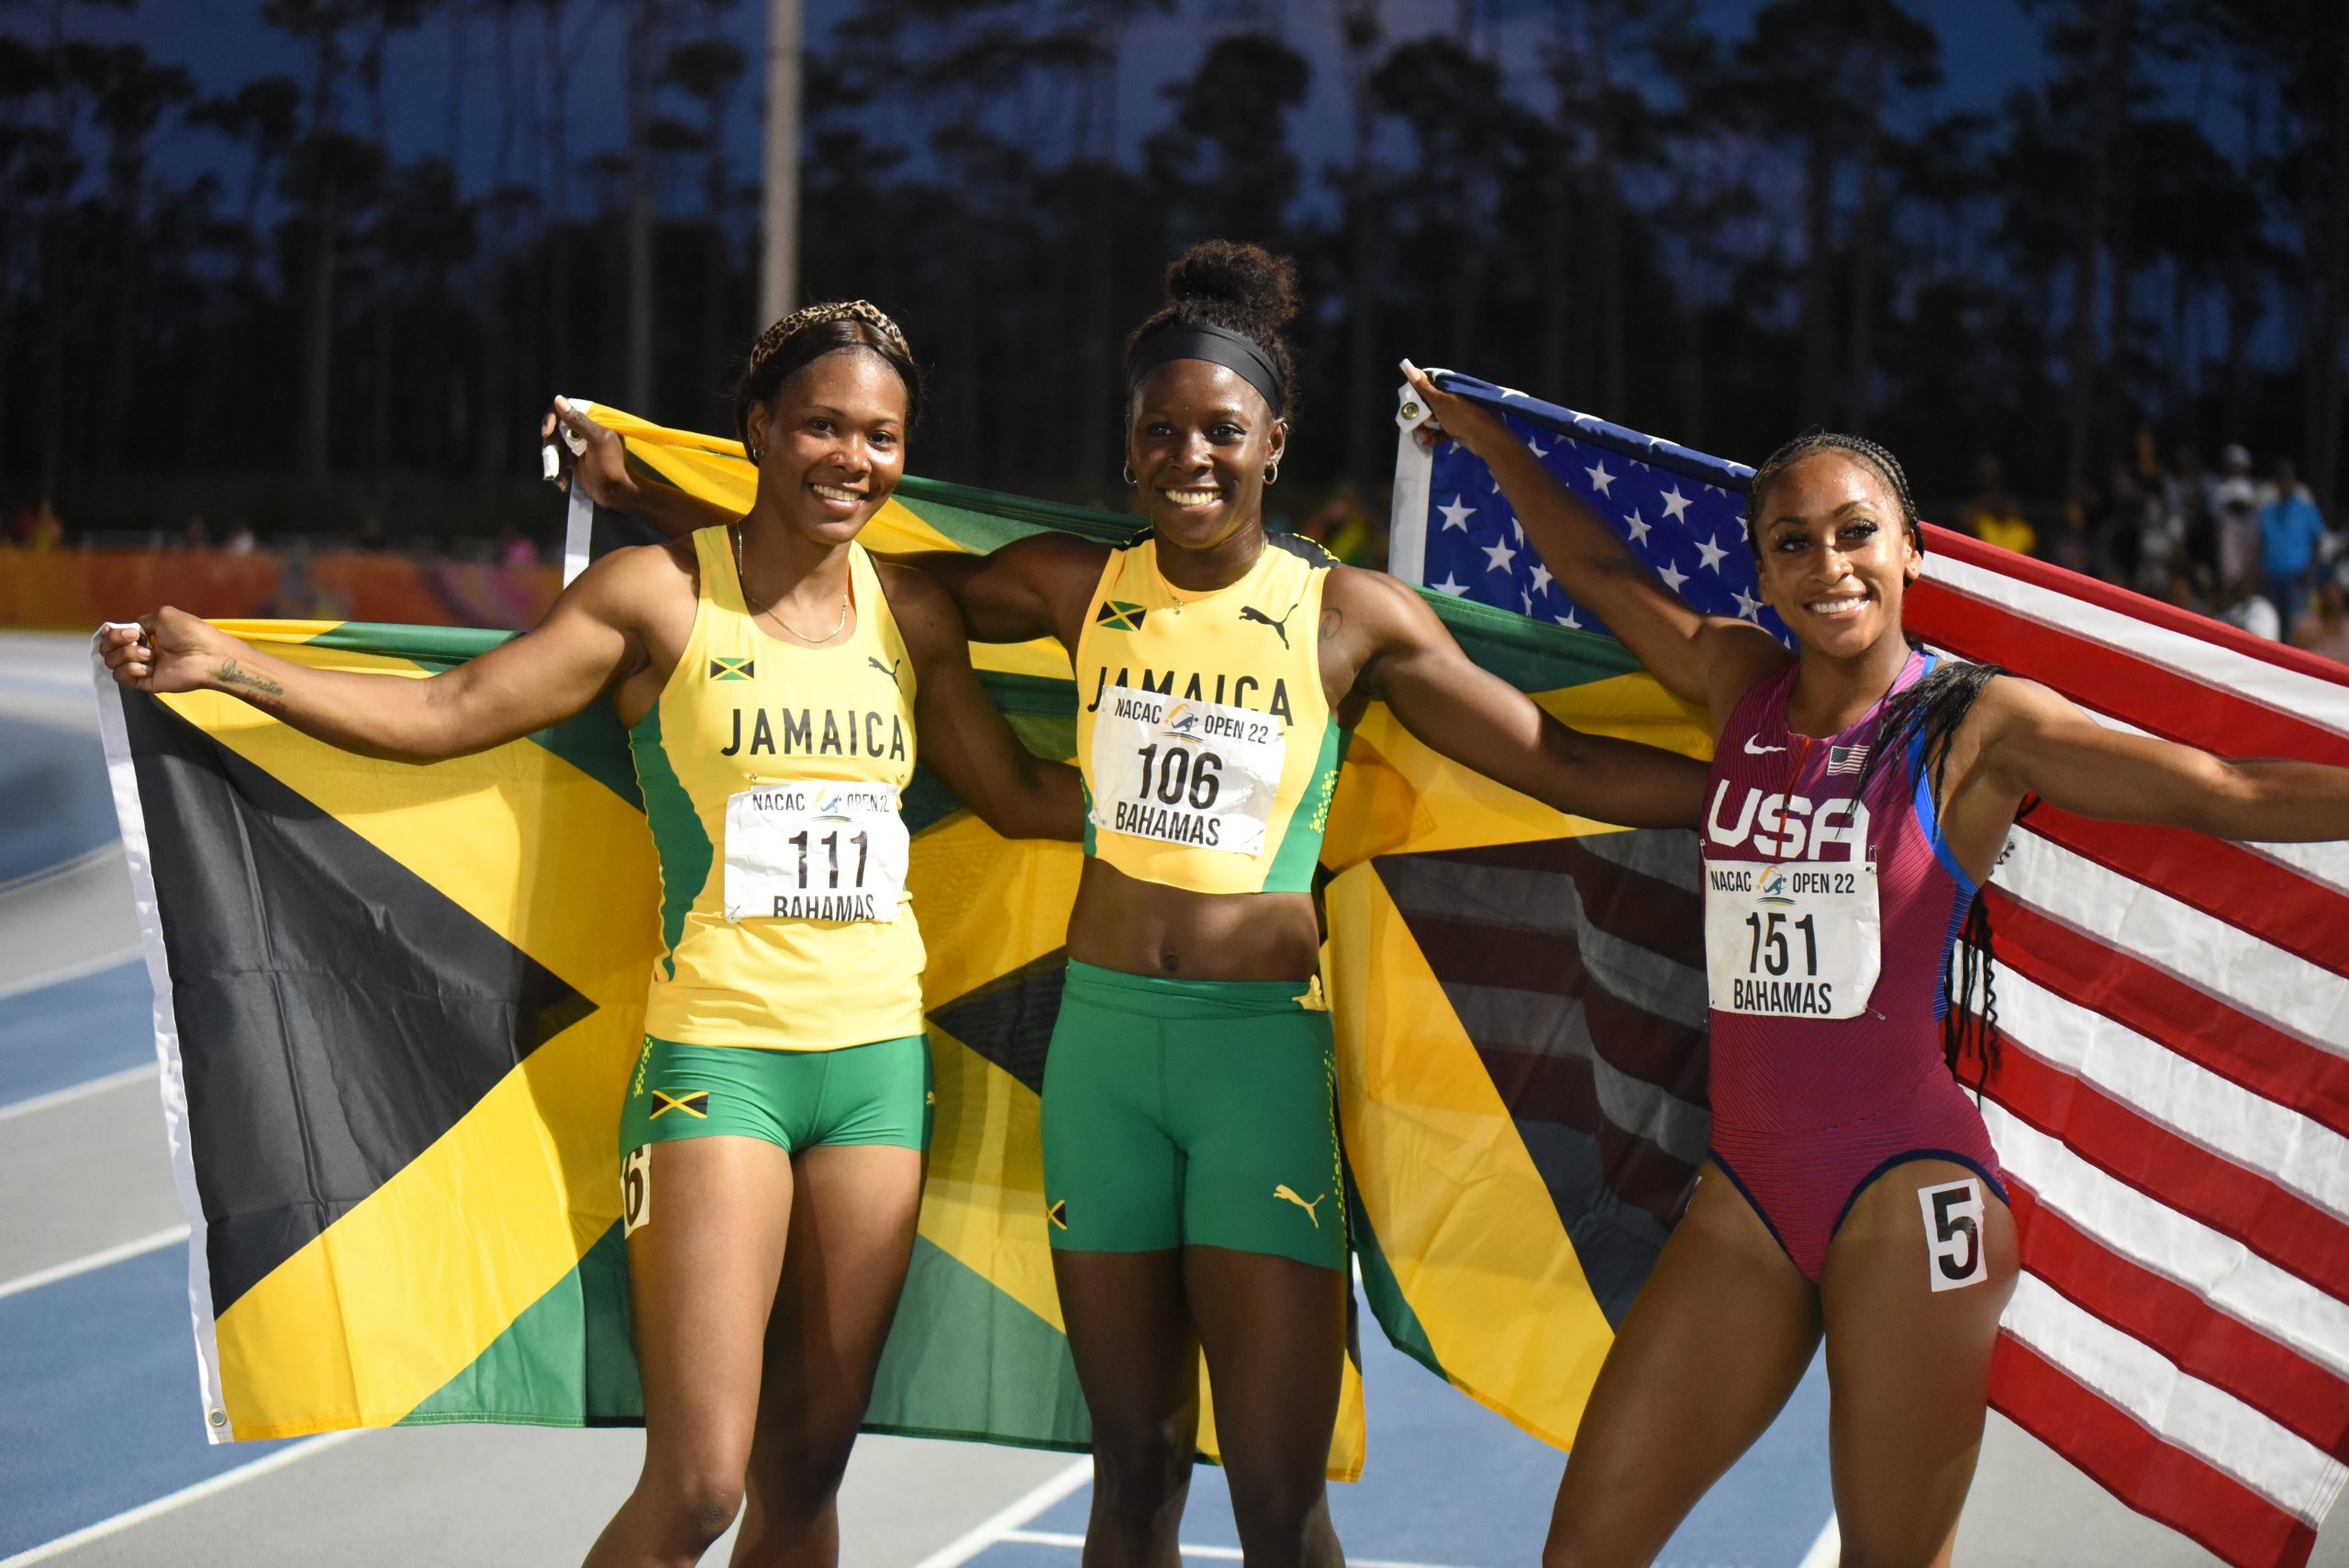 Shericka Jackson, after winning the women's 100m in a championship record 10.83, pose with bronze medallist Natasha Morrison, at the NACAC Open Championships in Freeport, Grand Bahamas.